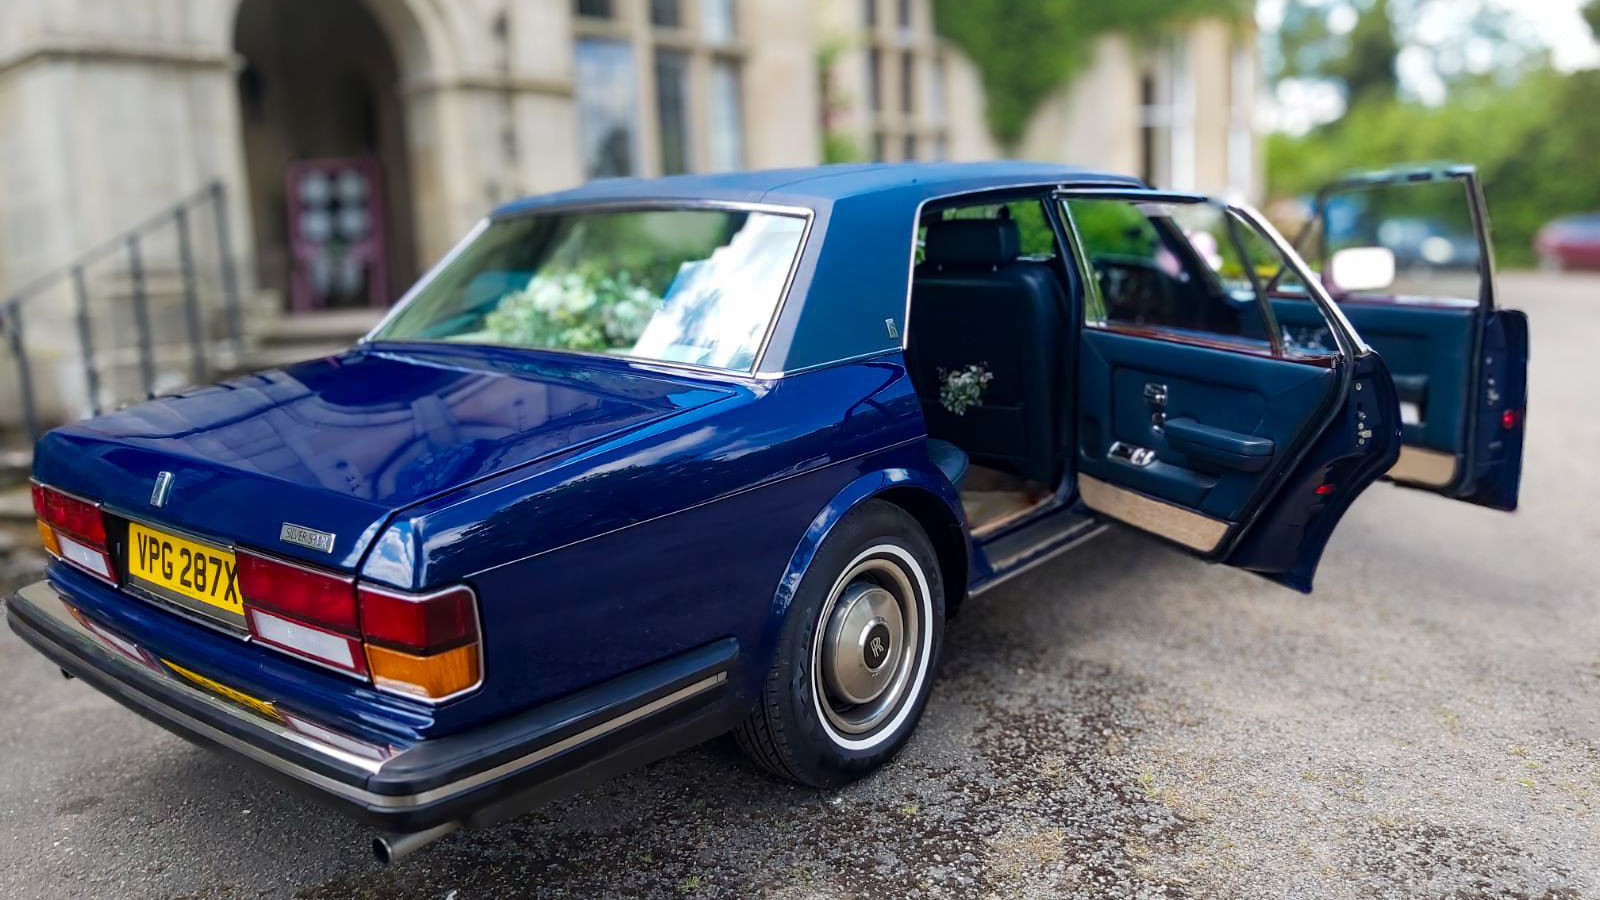 Side rear view of blue classic rolls-royce with both front and rear doors open showing blue interior on door panels